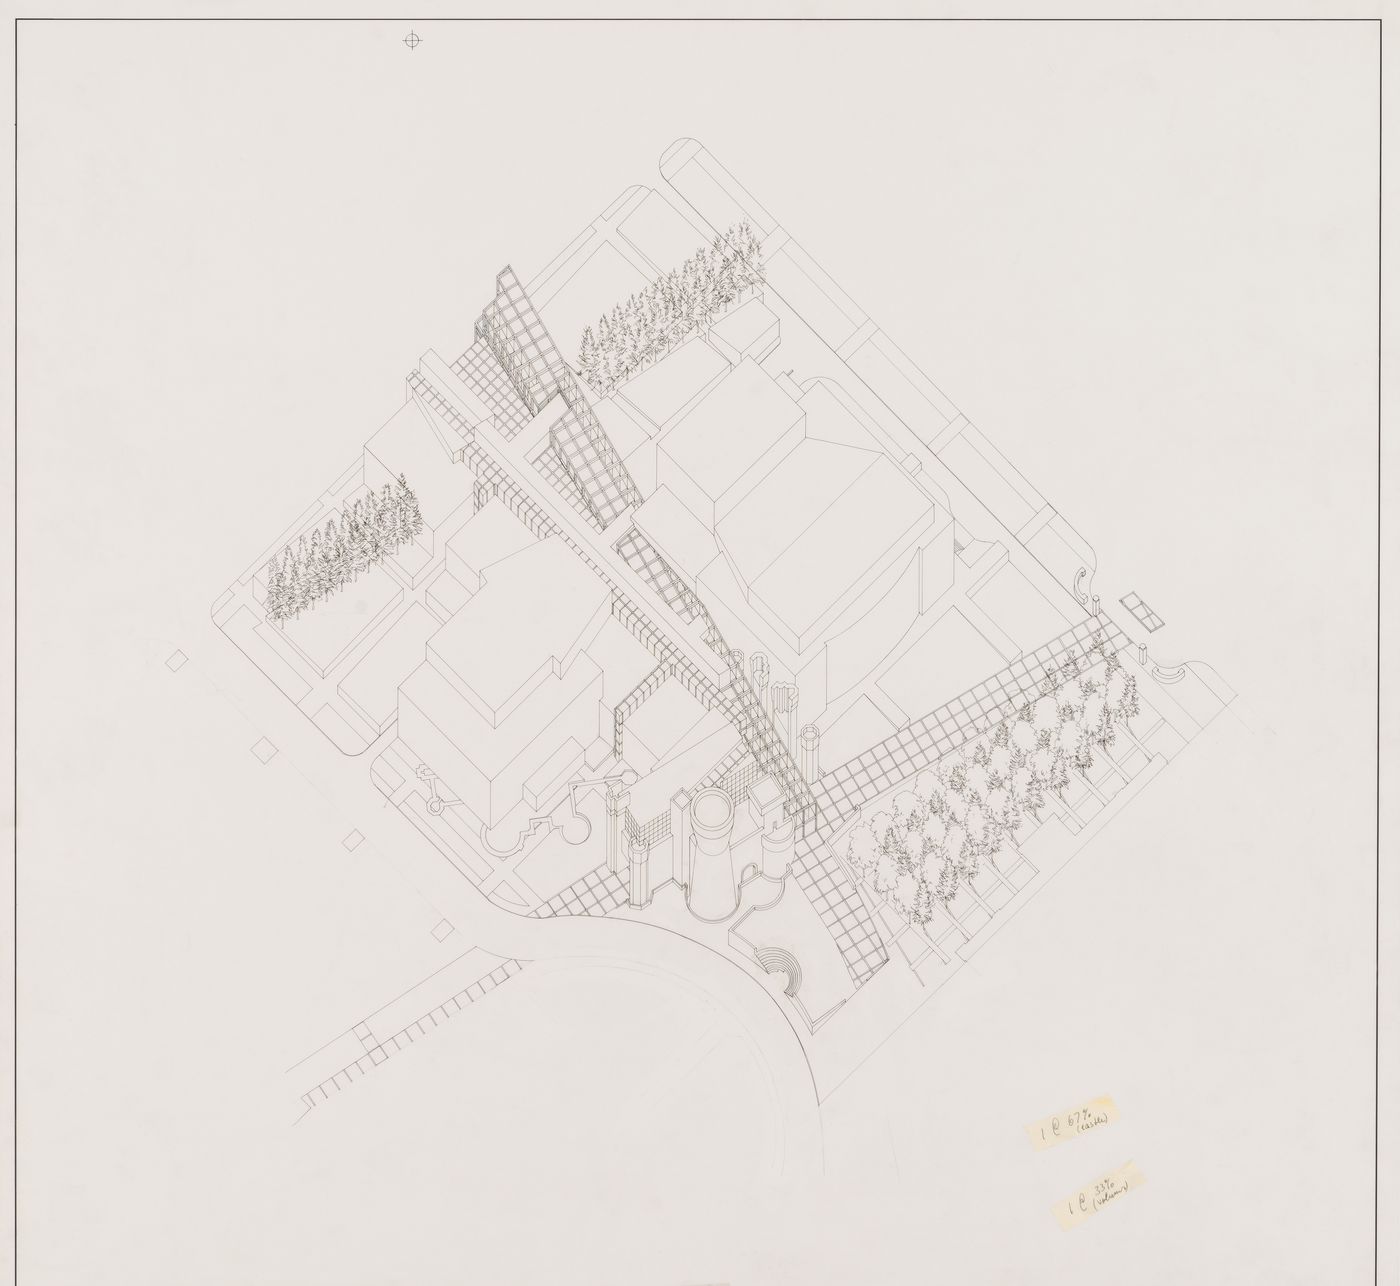 Wexner Center for the Visual Arts, Columbus, Ohio: axonometric view from south-west